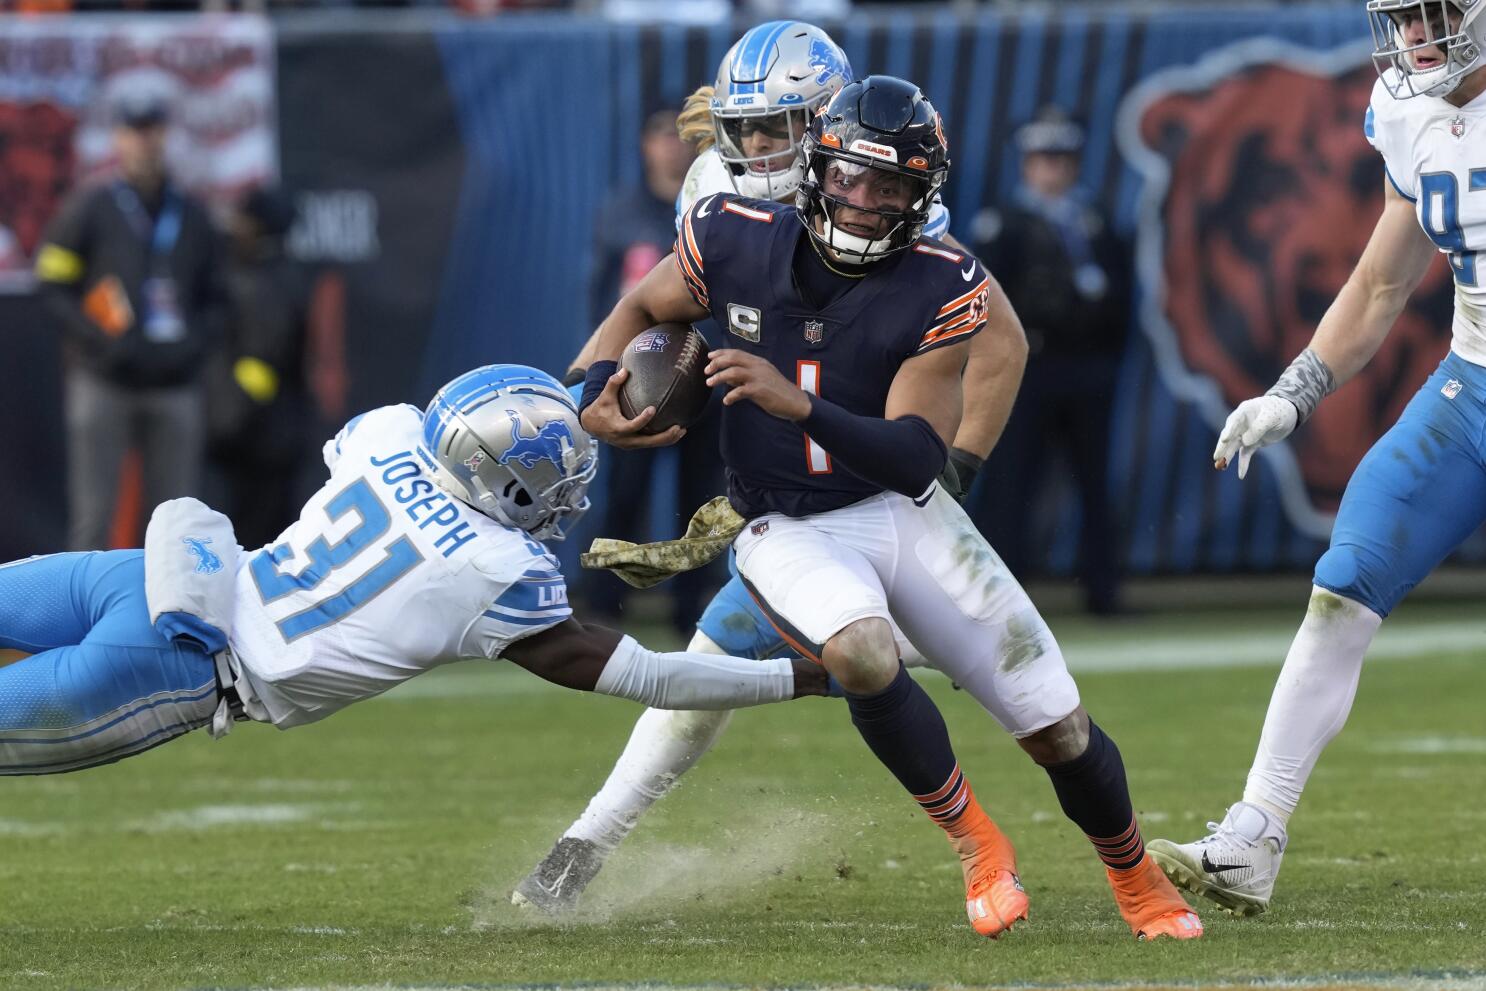 Fields, Bears running game deal with Herbert's injury - The San